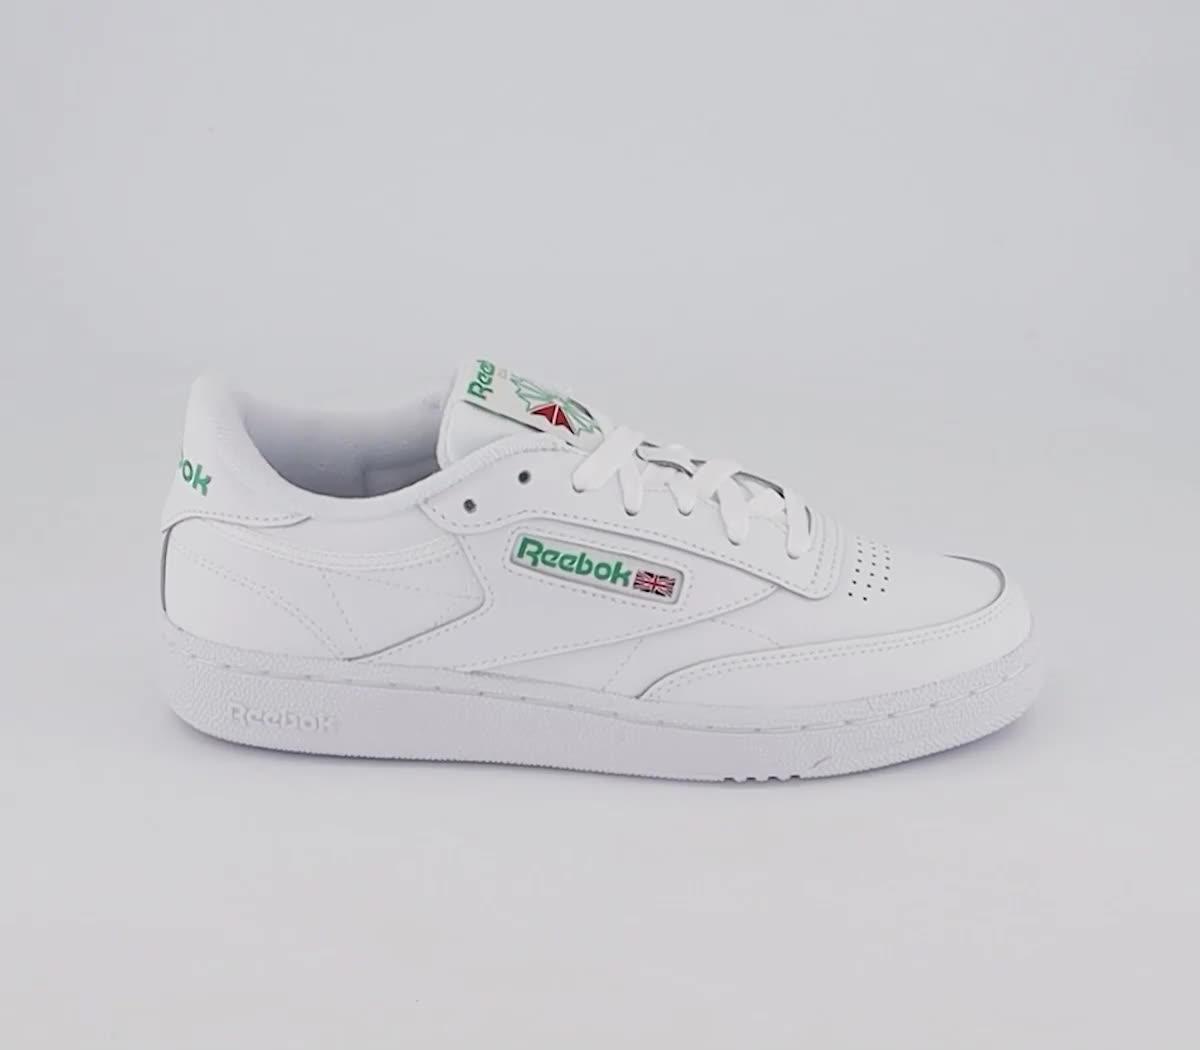 imod celle fryser Reebok Club C 85 Trainers White Green - Women's Classic Trainers